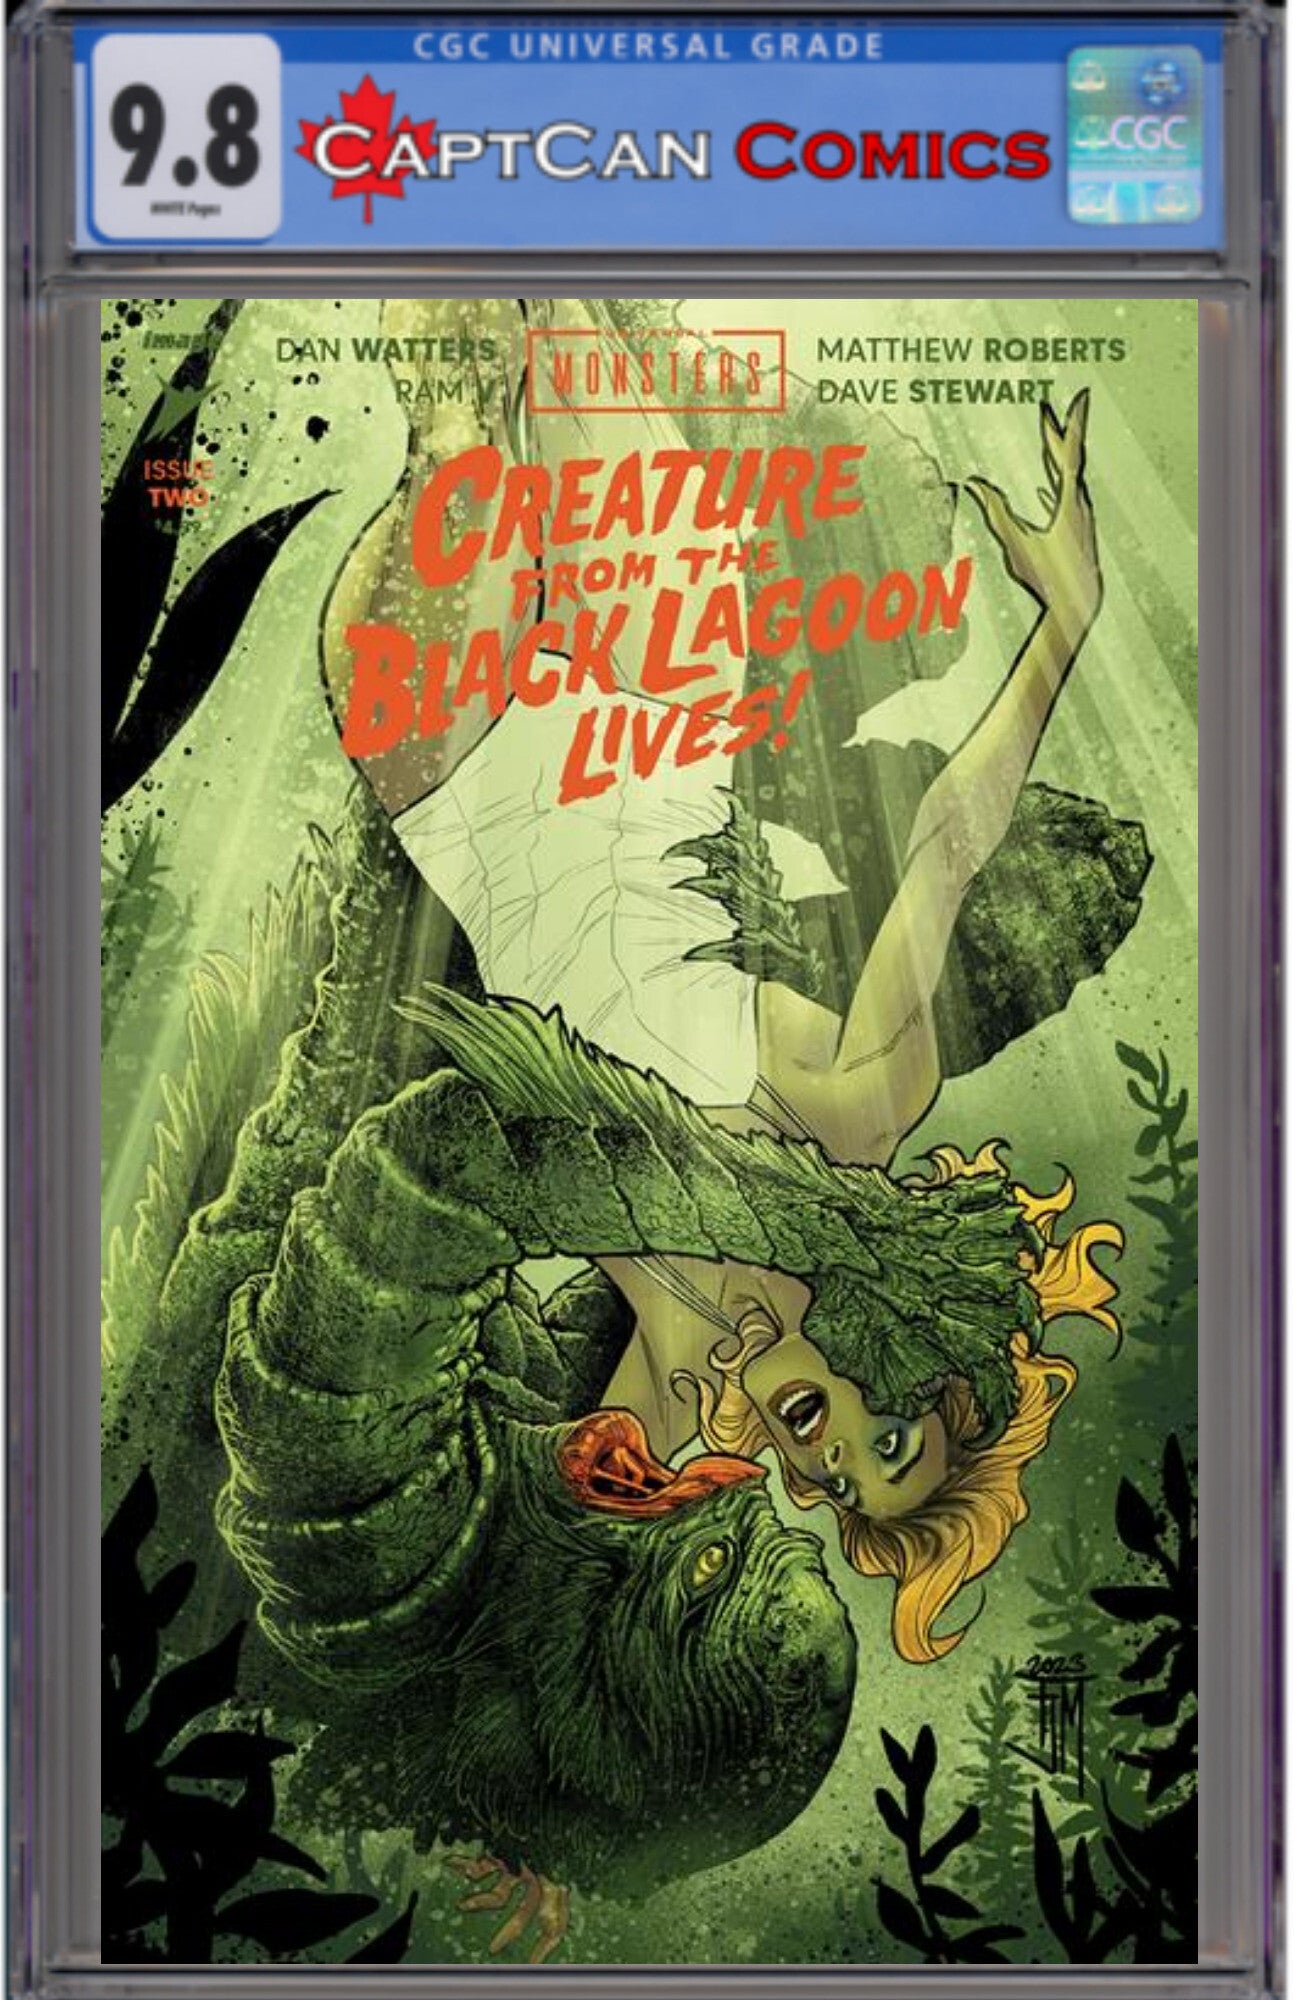 UNIVERSAL MONSTERS CREATURE FROM THE BLACK LAGOON LIVES #2 (OF 4) CVR B FRANCIS MANAPUL VAR